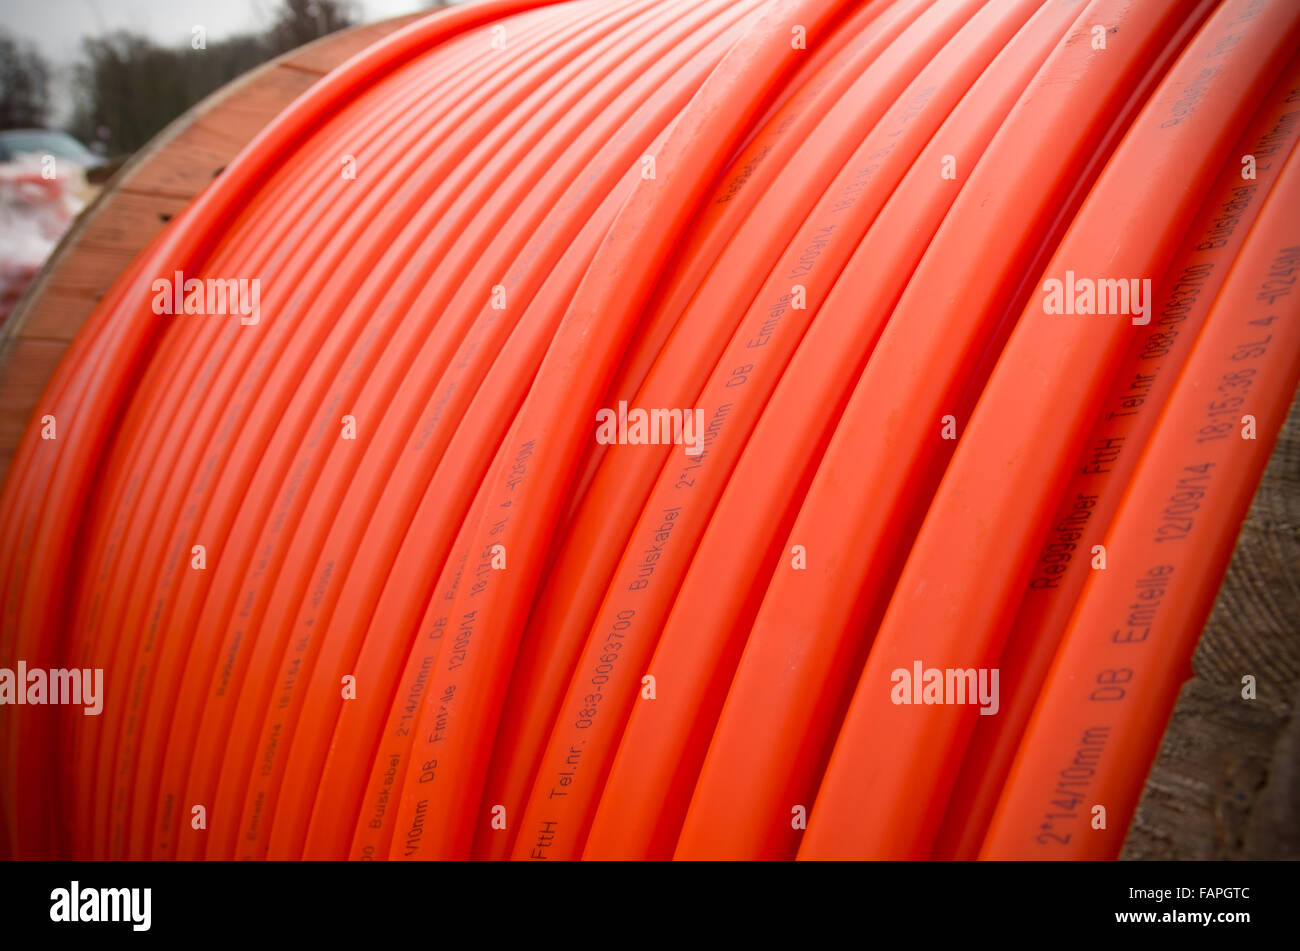 HENGELO, NETHERLANDS - MARCH 28, 2015: Orange fiber cable owned by Reggefiber, a Dutch company that specializes in the installat Stock Photo